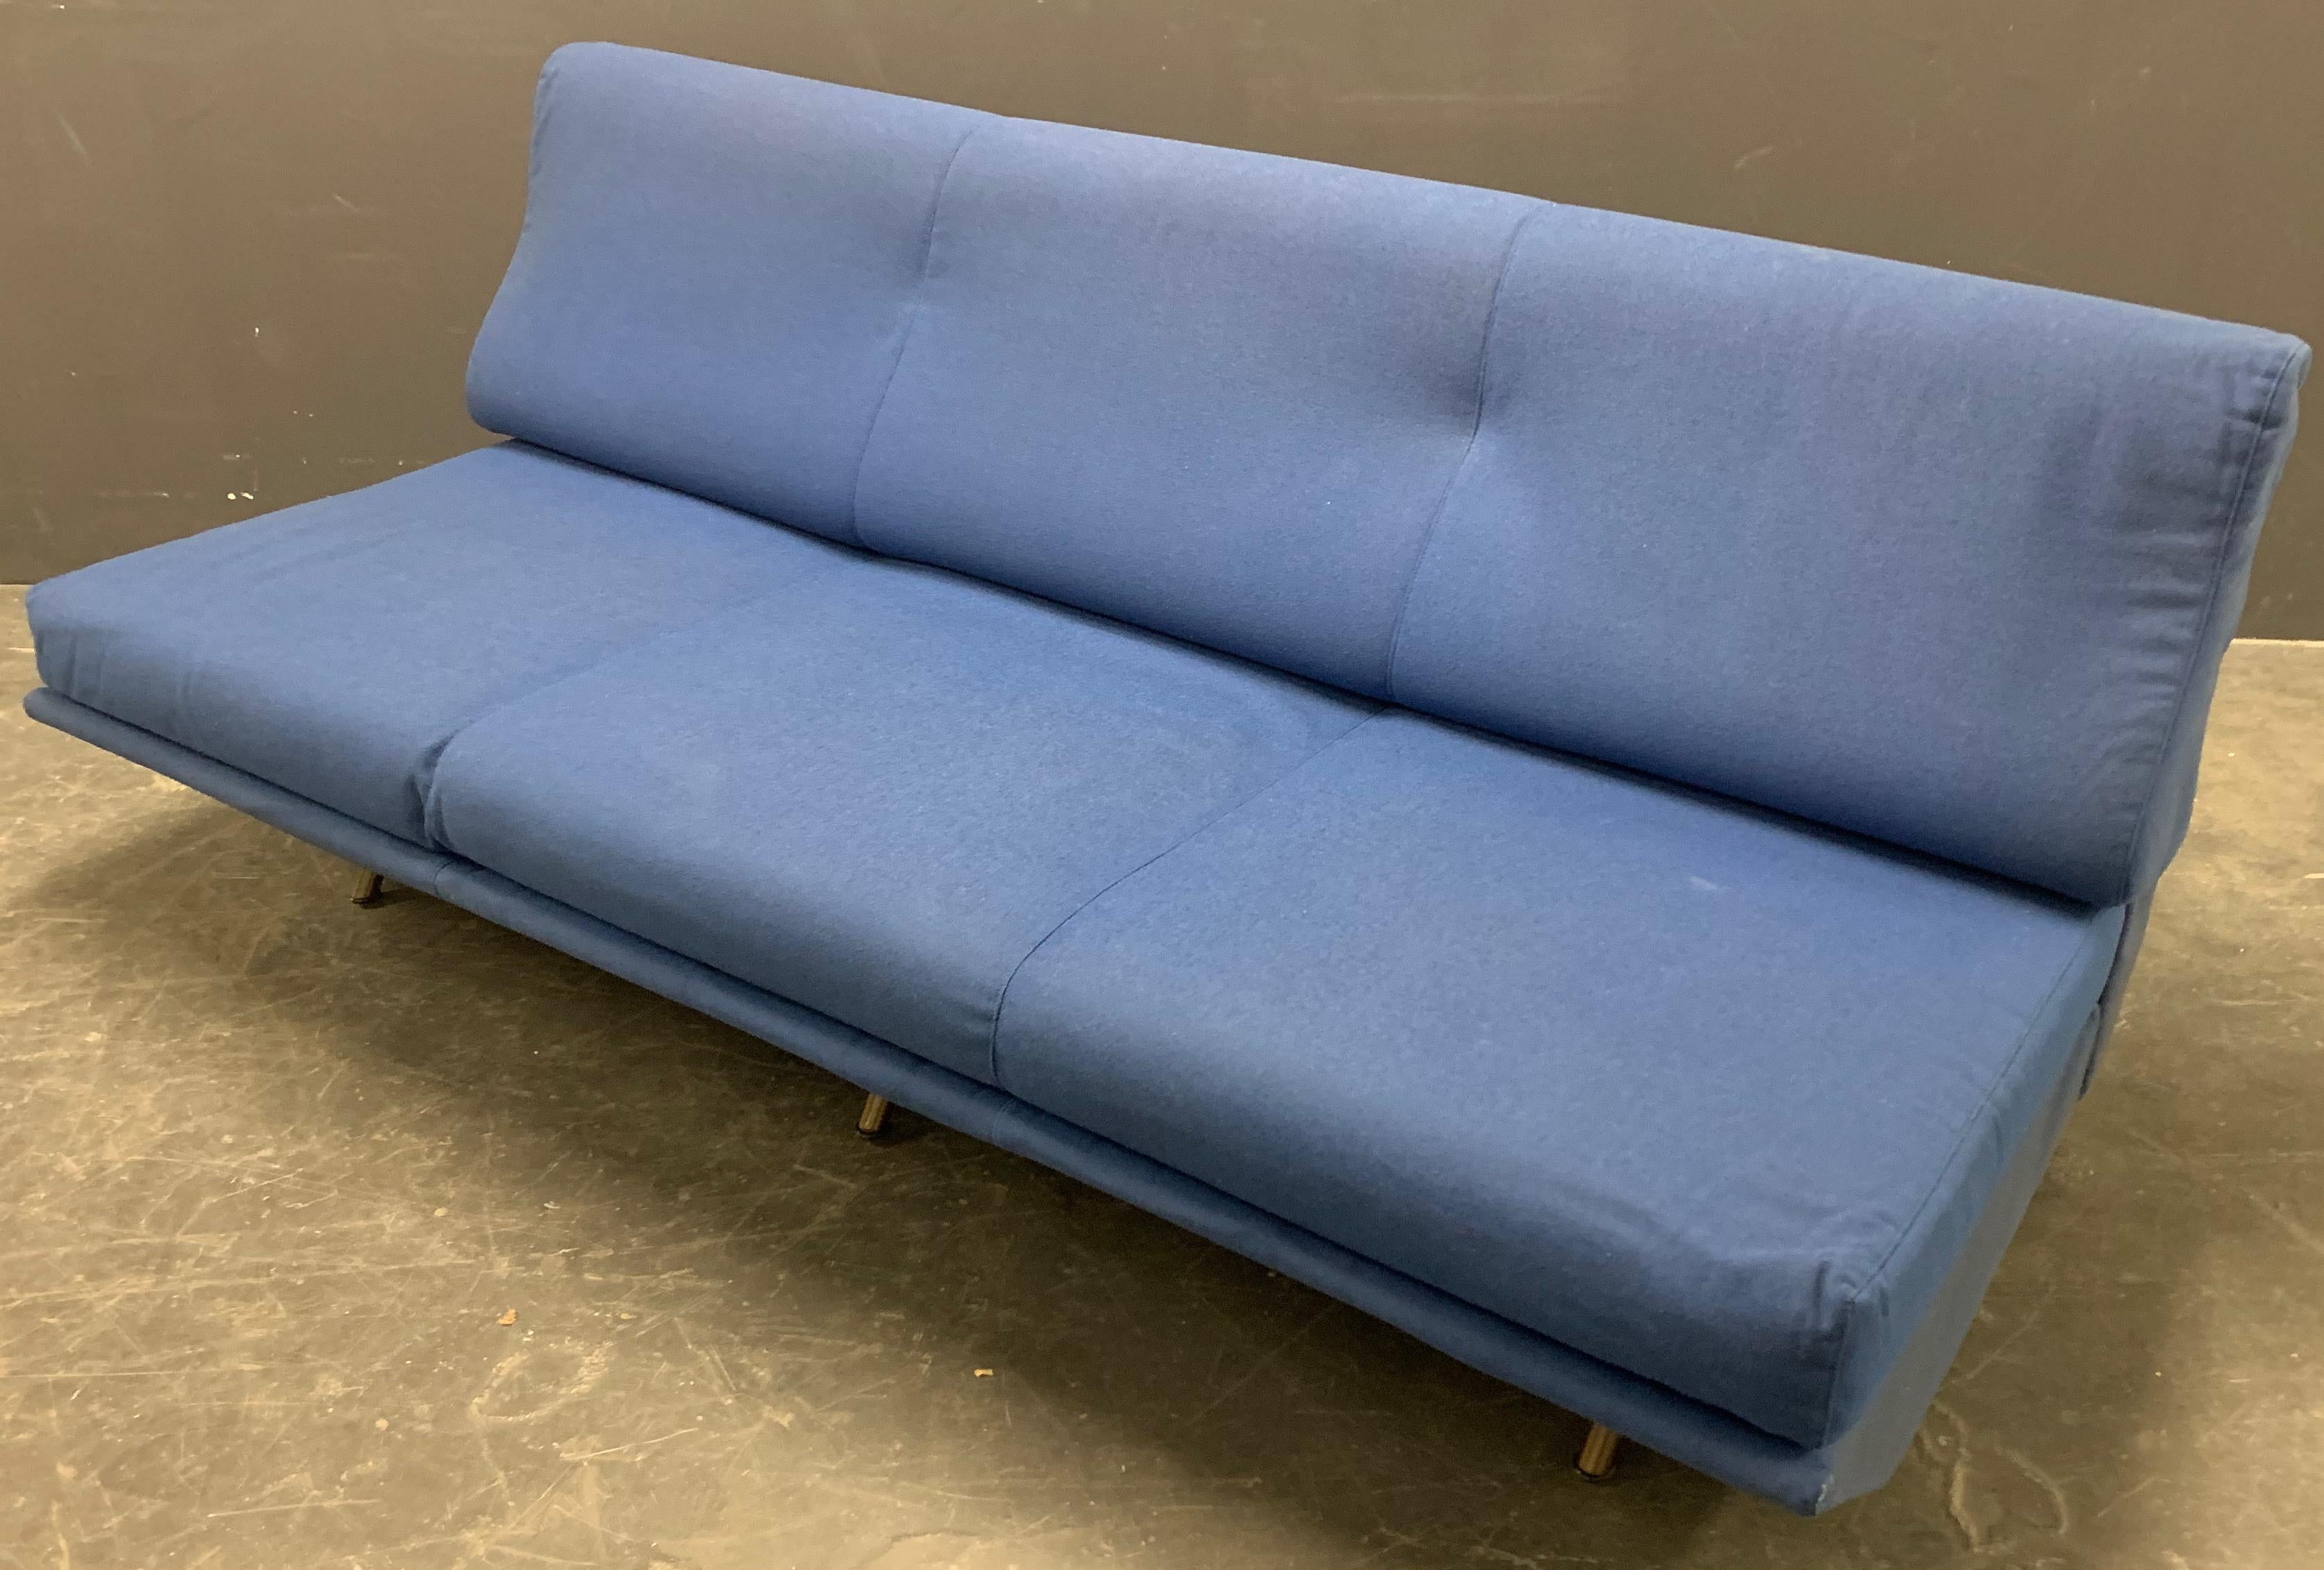 Rare Sleep-O-Matic Sofa / Daybed by Marco Zanuso For Sale 1